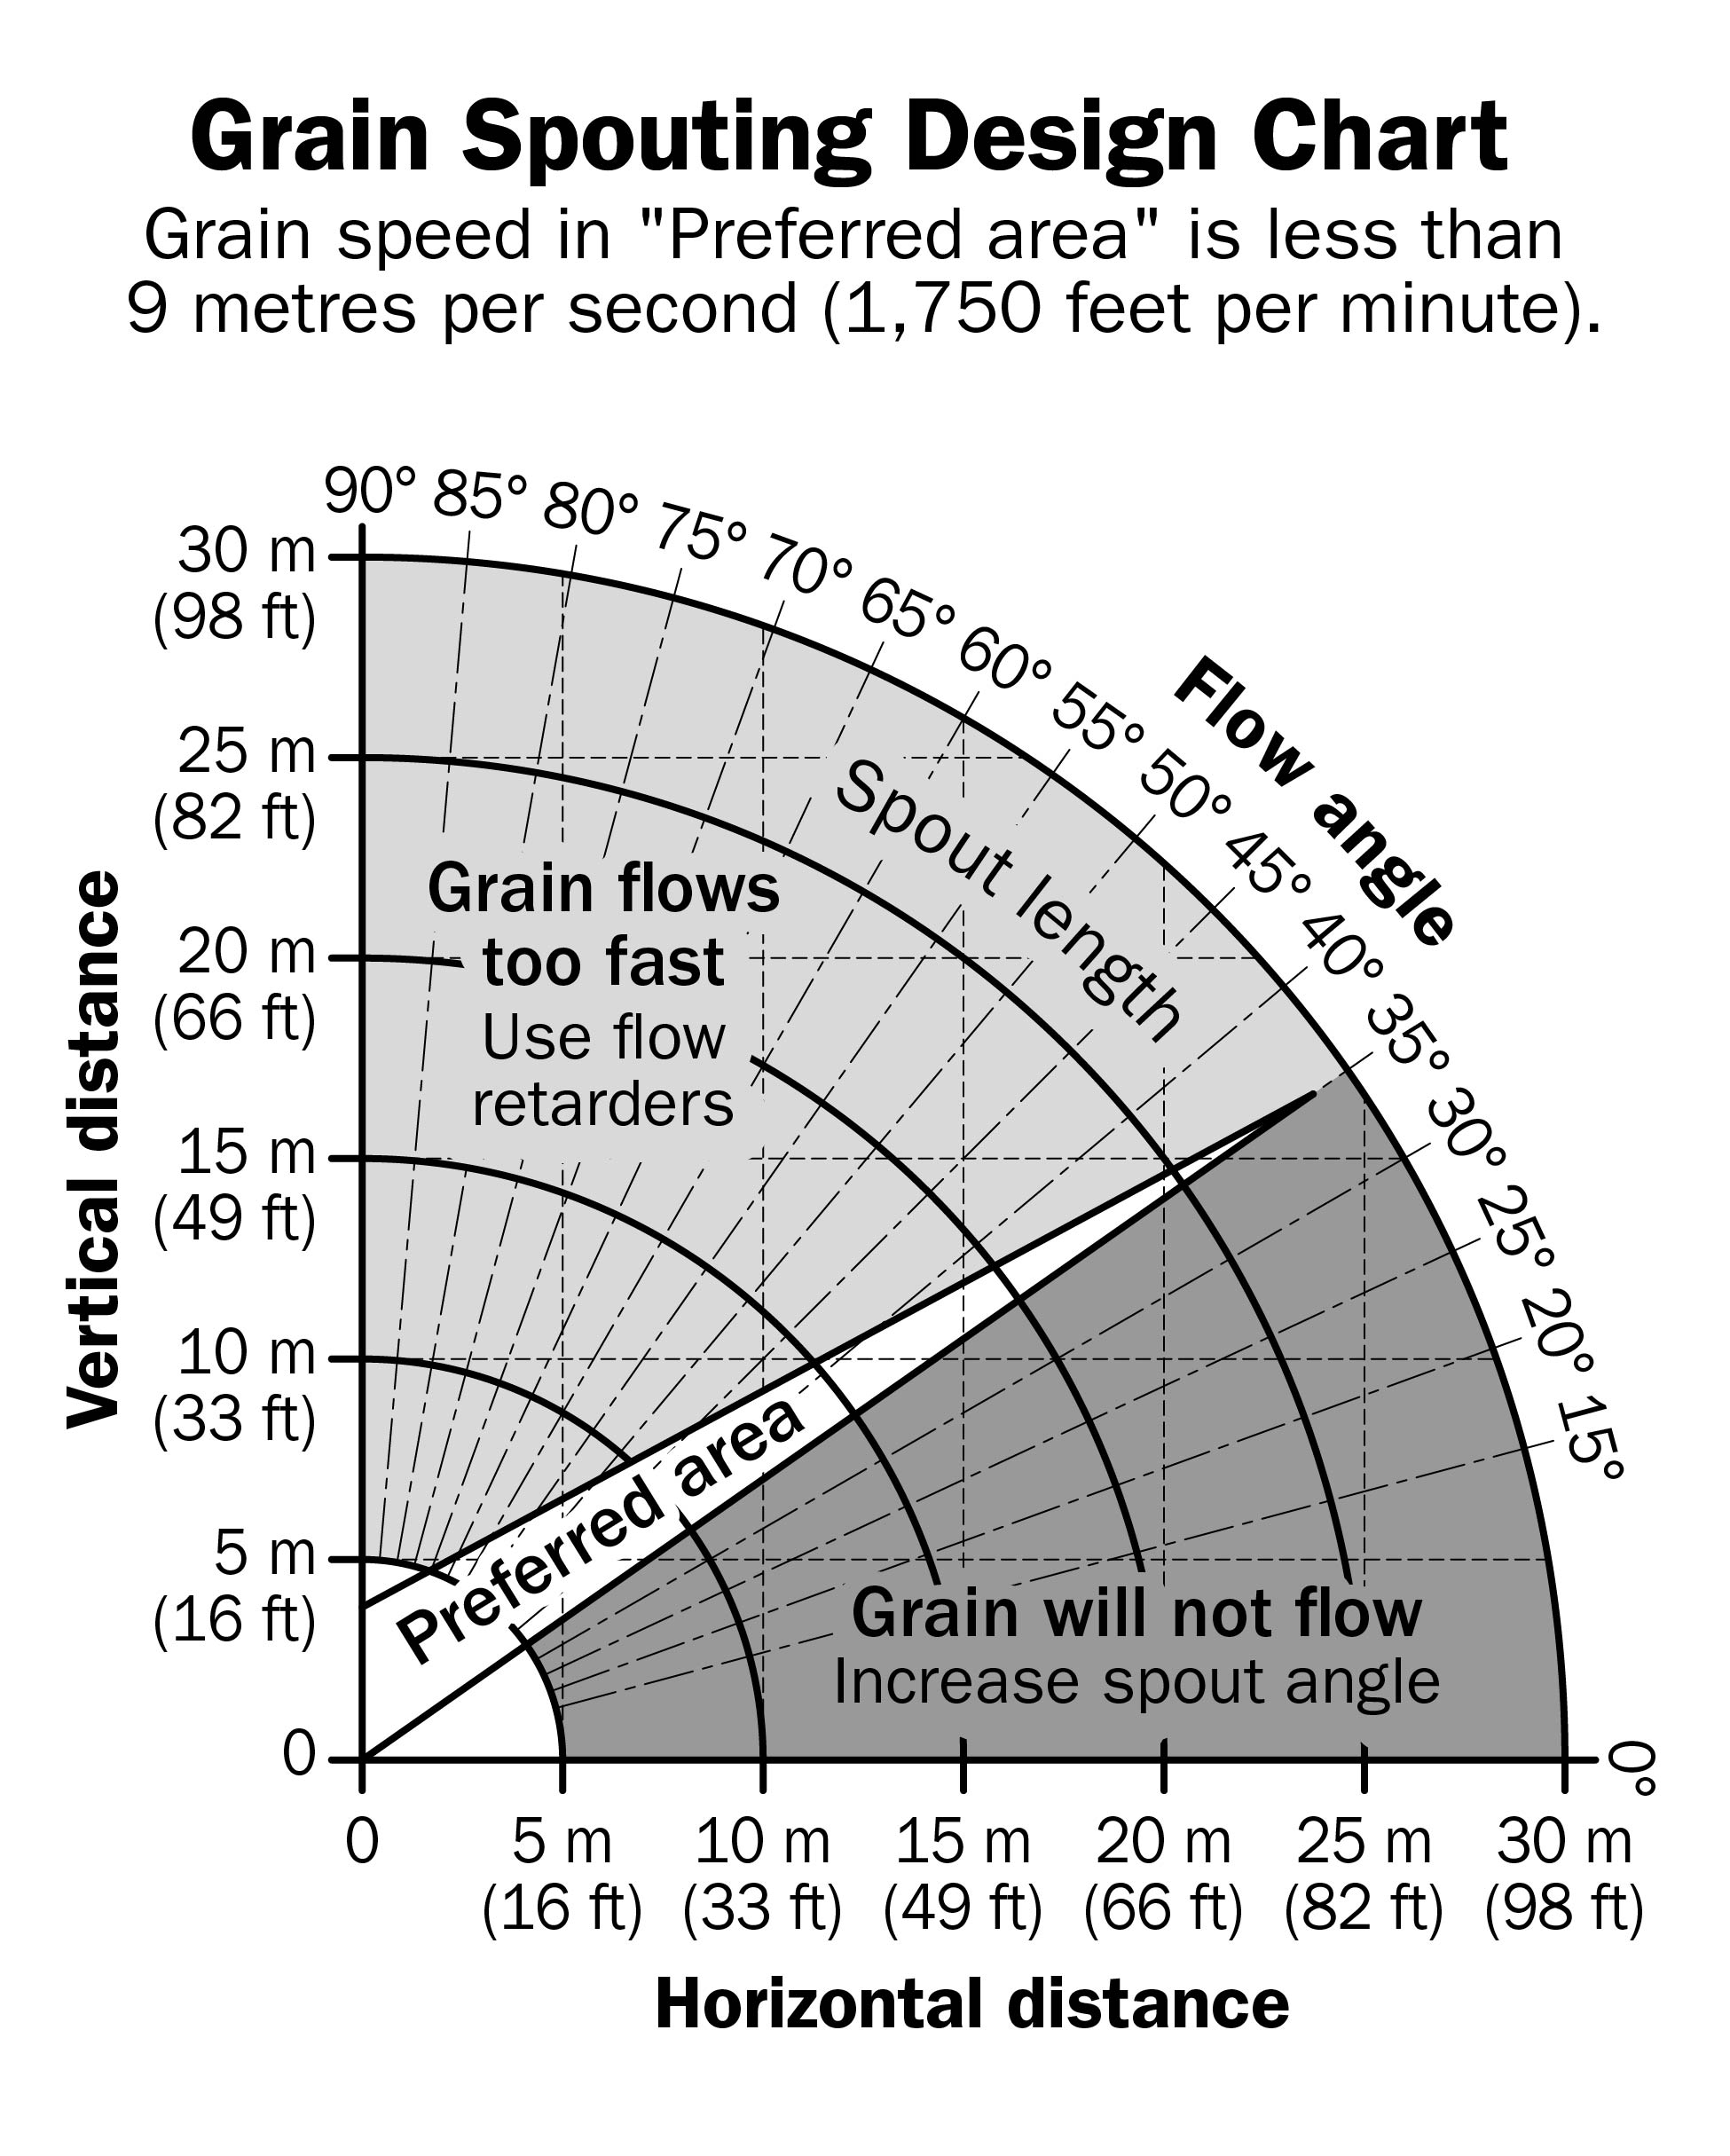 Design grain elevator spouting angle and length in \'preferred area\' whenever possible. Use cushion boxes and/or inline flow retarders when spouting is too steep to reduce grain speed and prevent dust creation. Adapted from Nolin Milling Inc., Dickens IA.